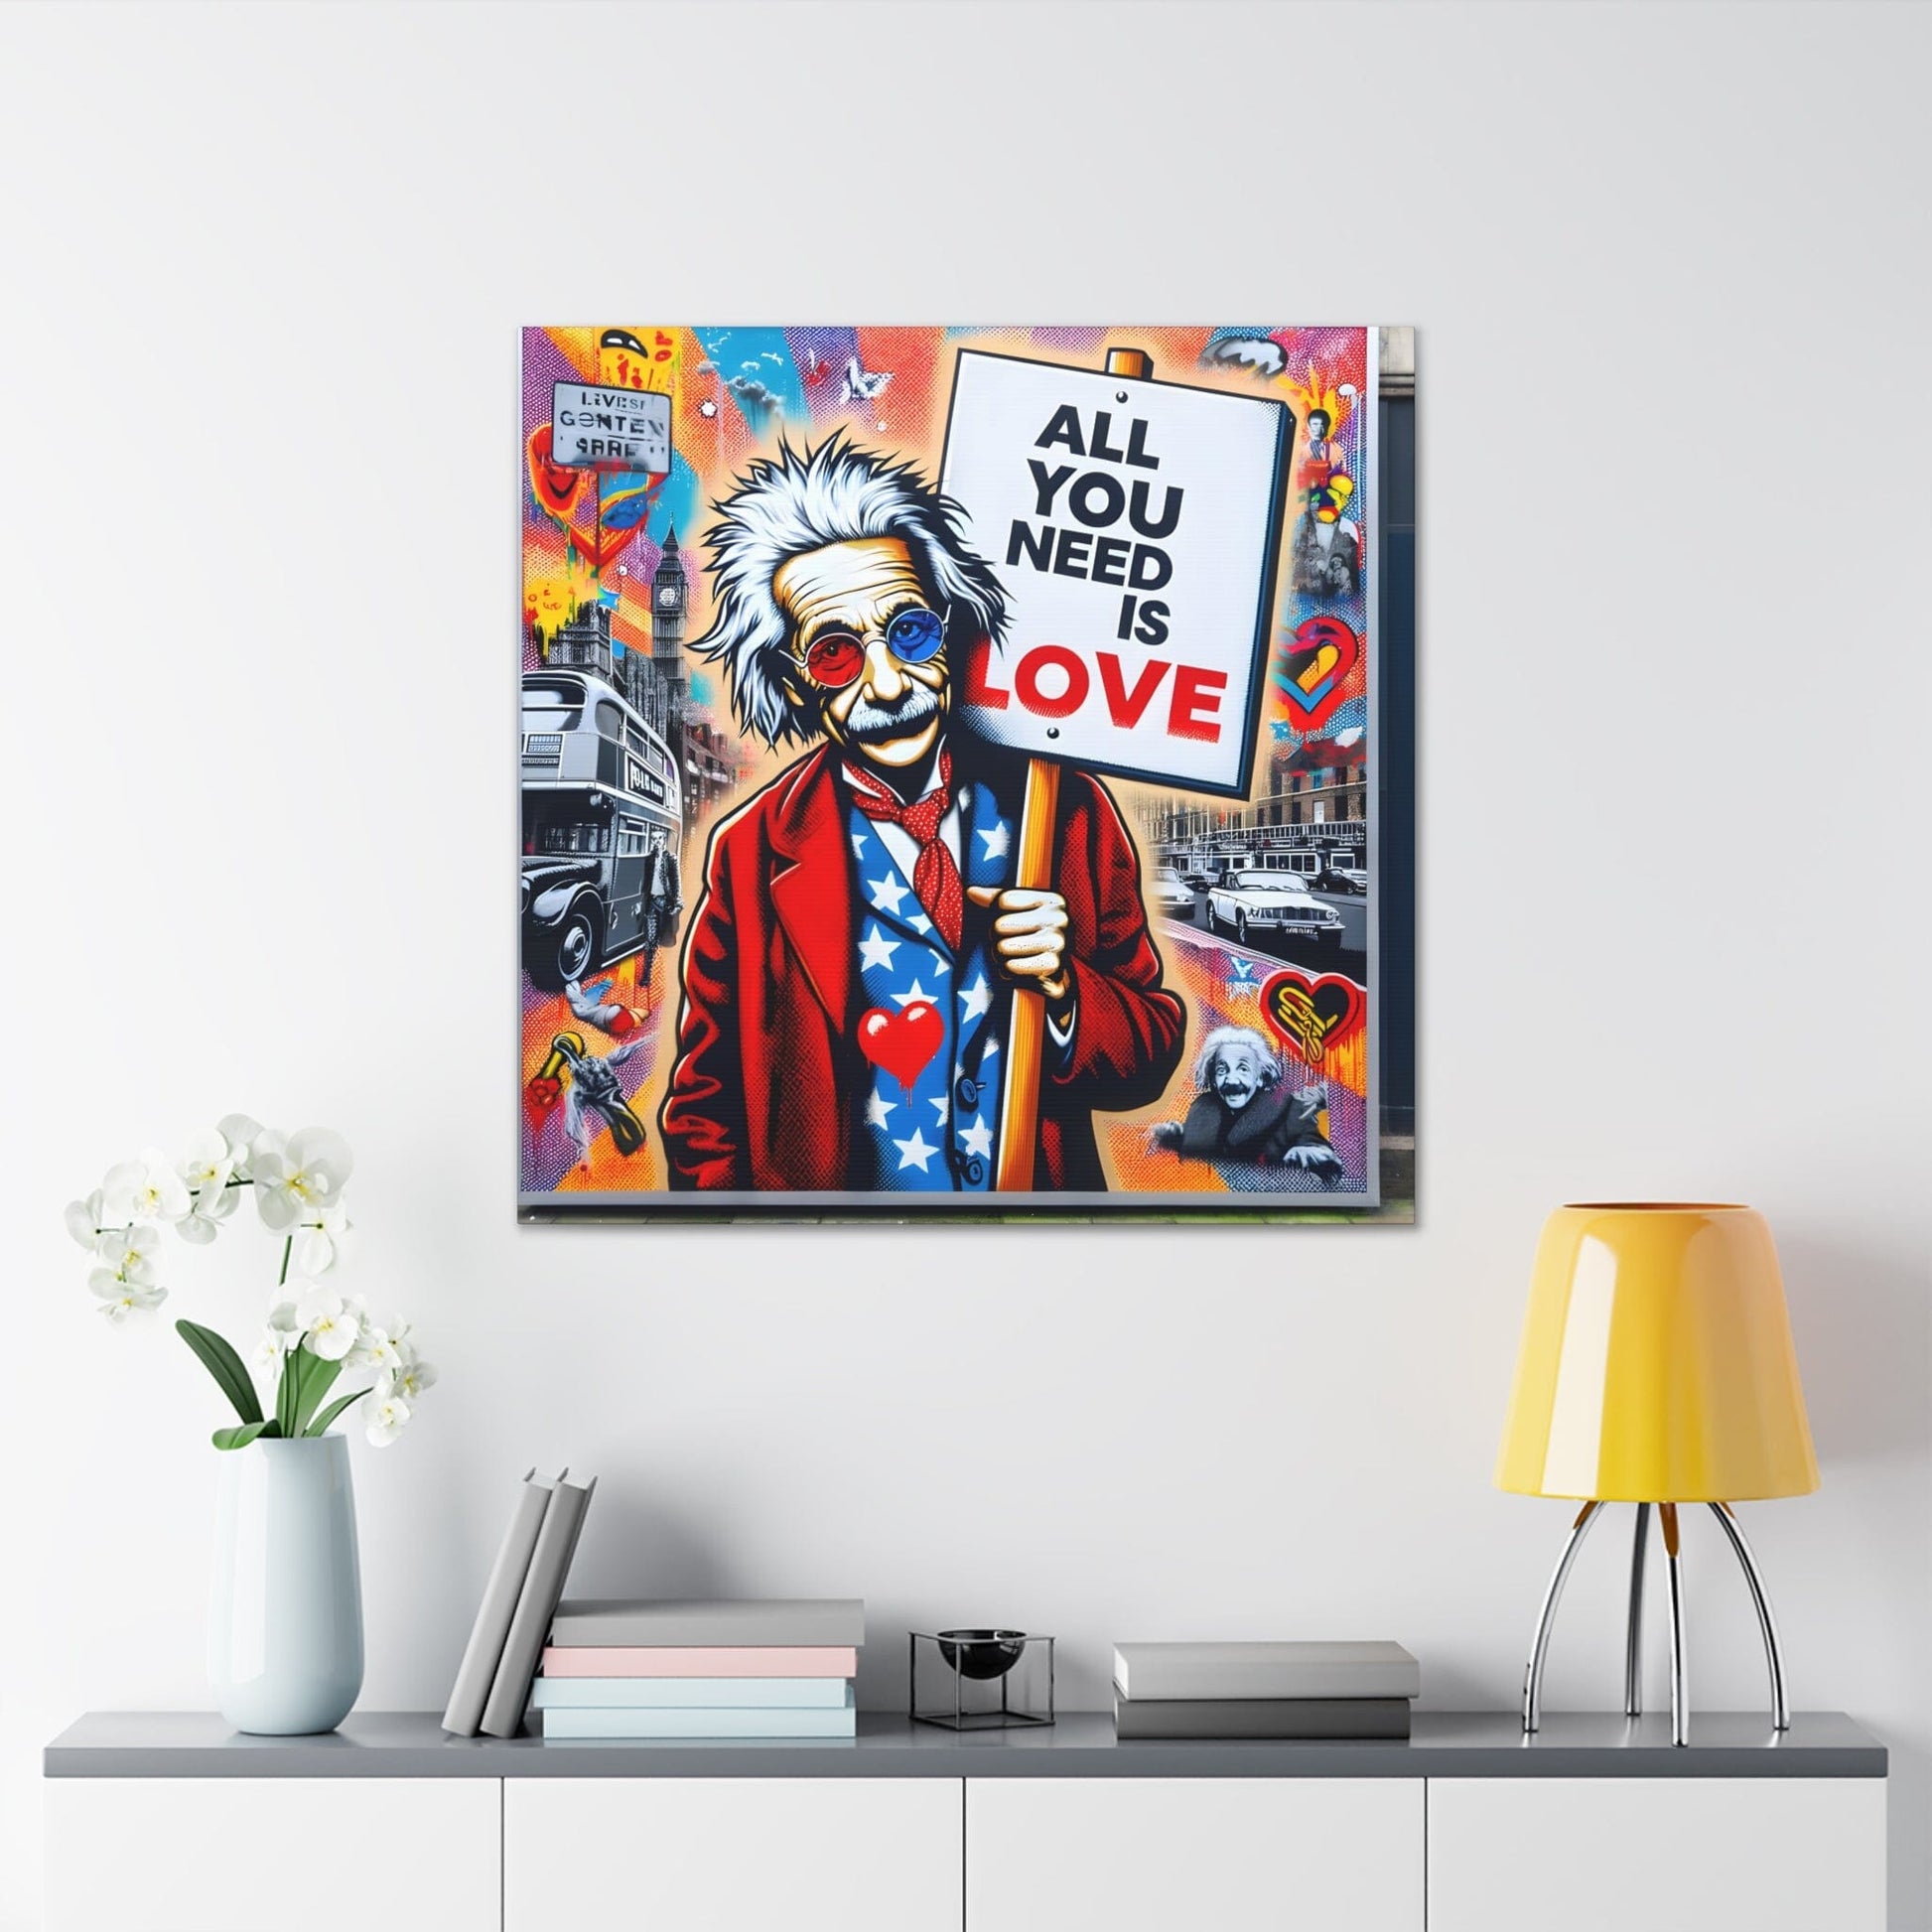 Julian Ardley. Relativity of Love. Exclusive Canvas Graphic Print.